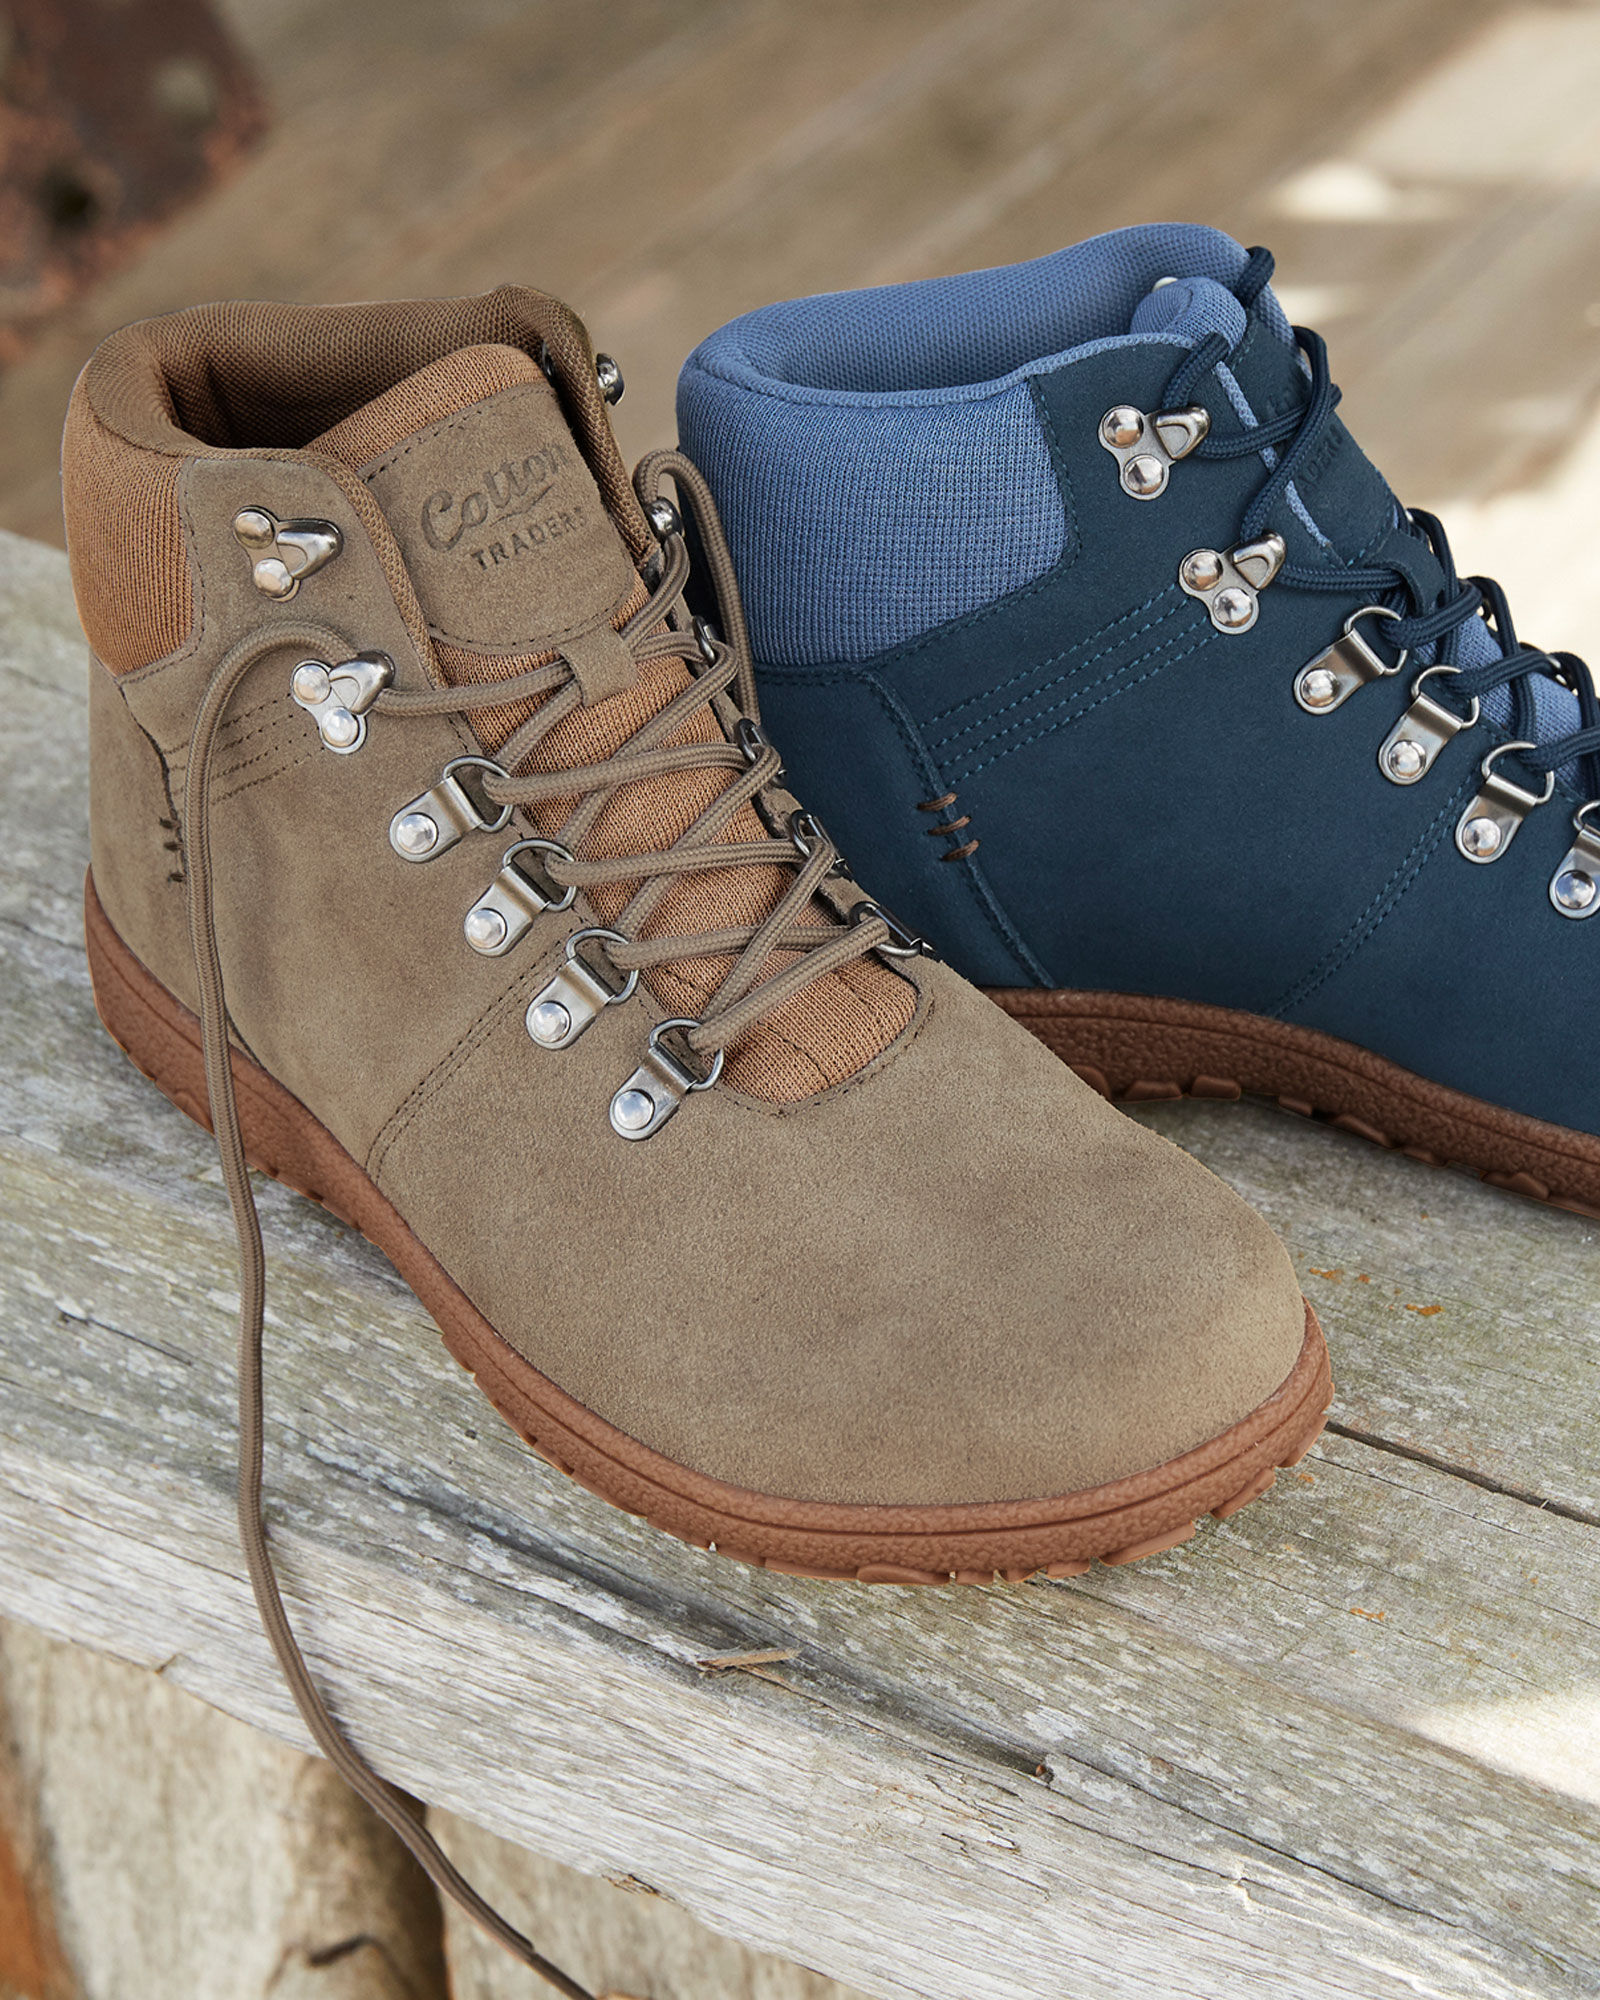 Buy > cotton trader walking boots > in stock